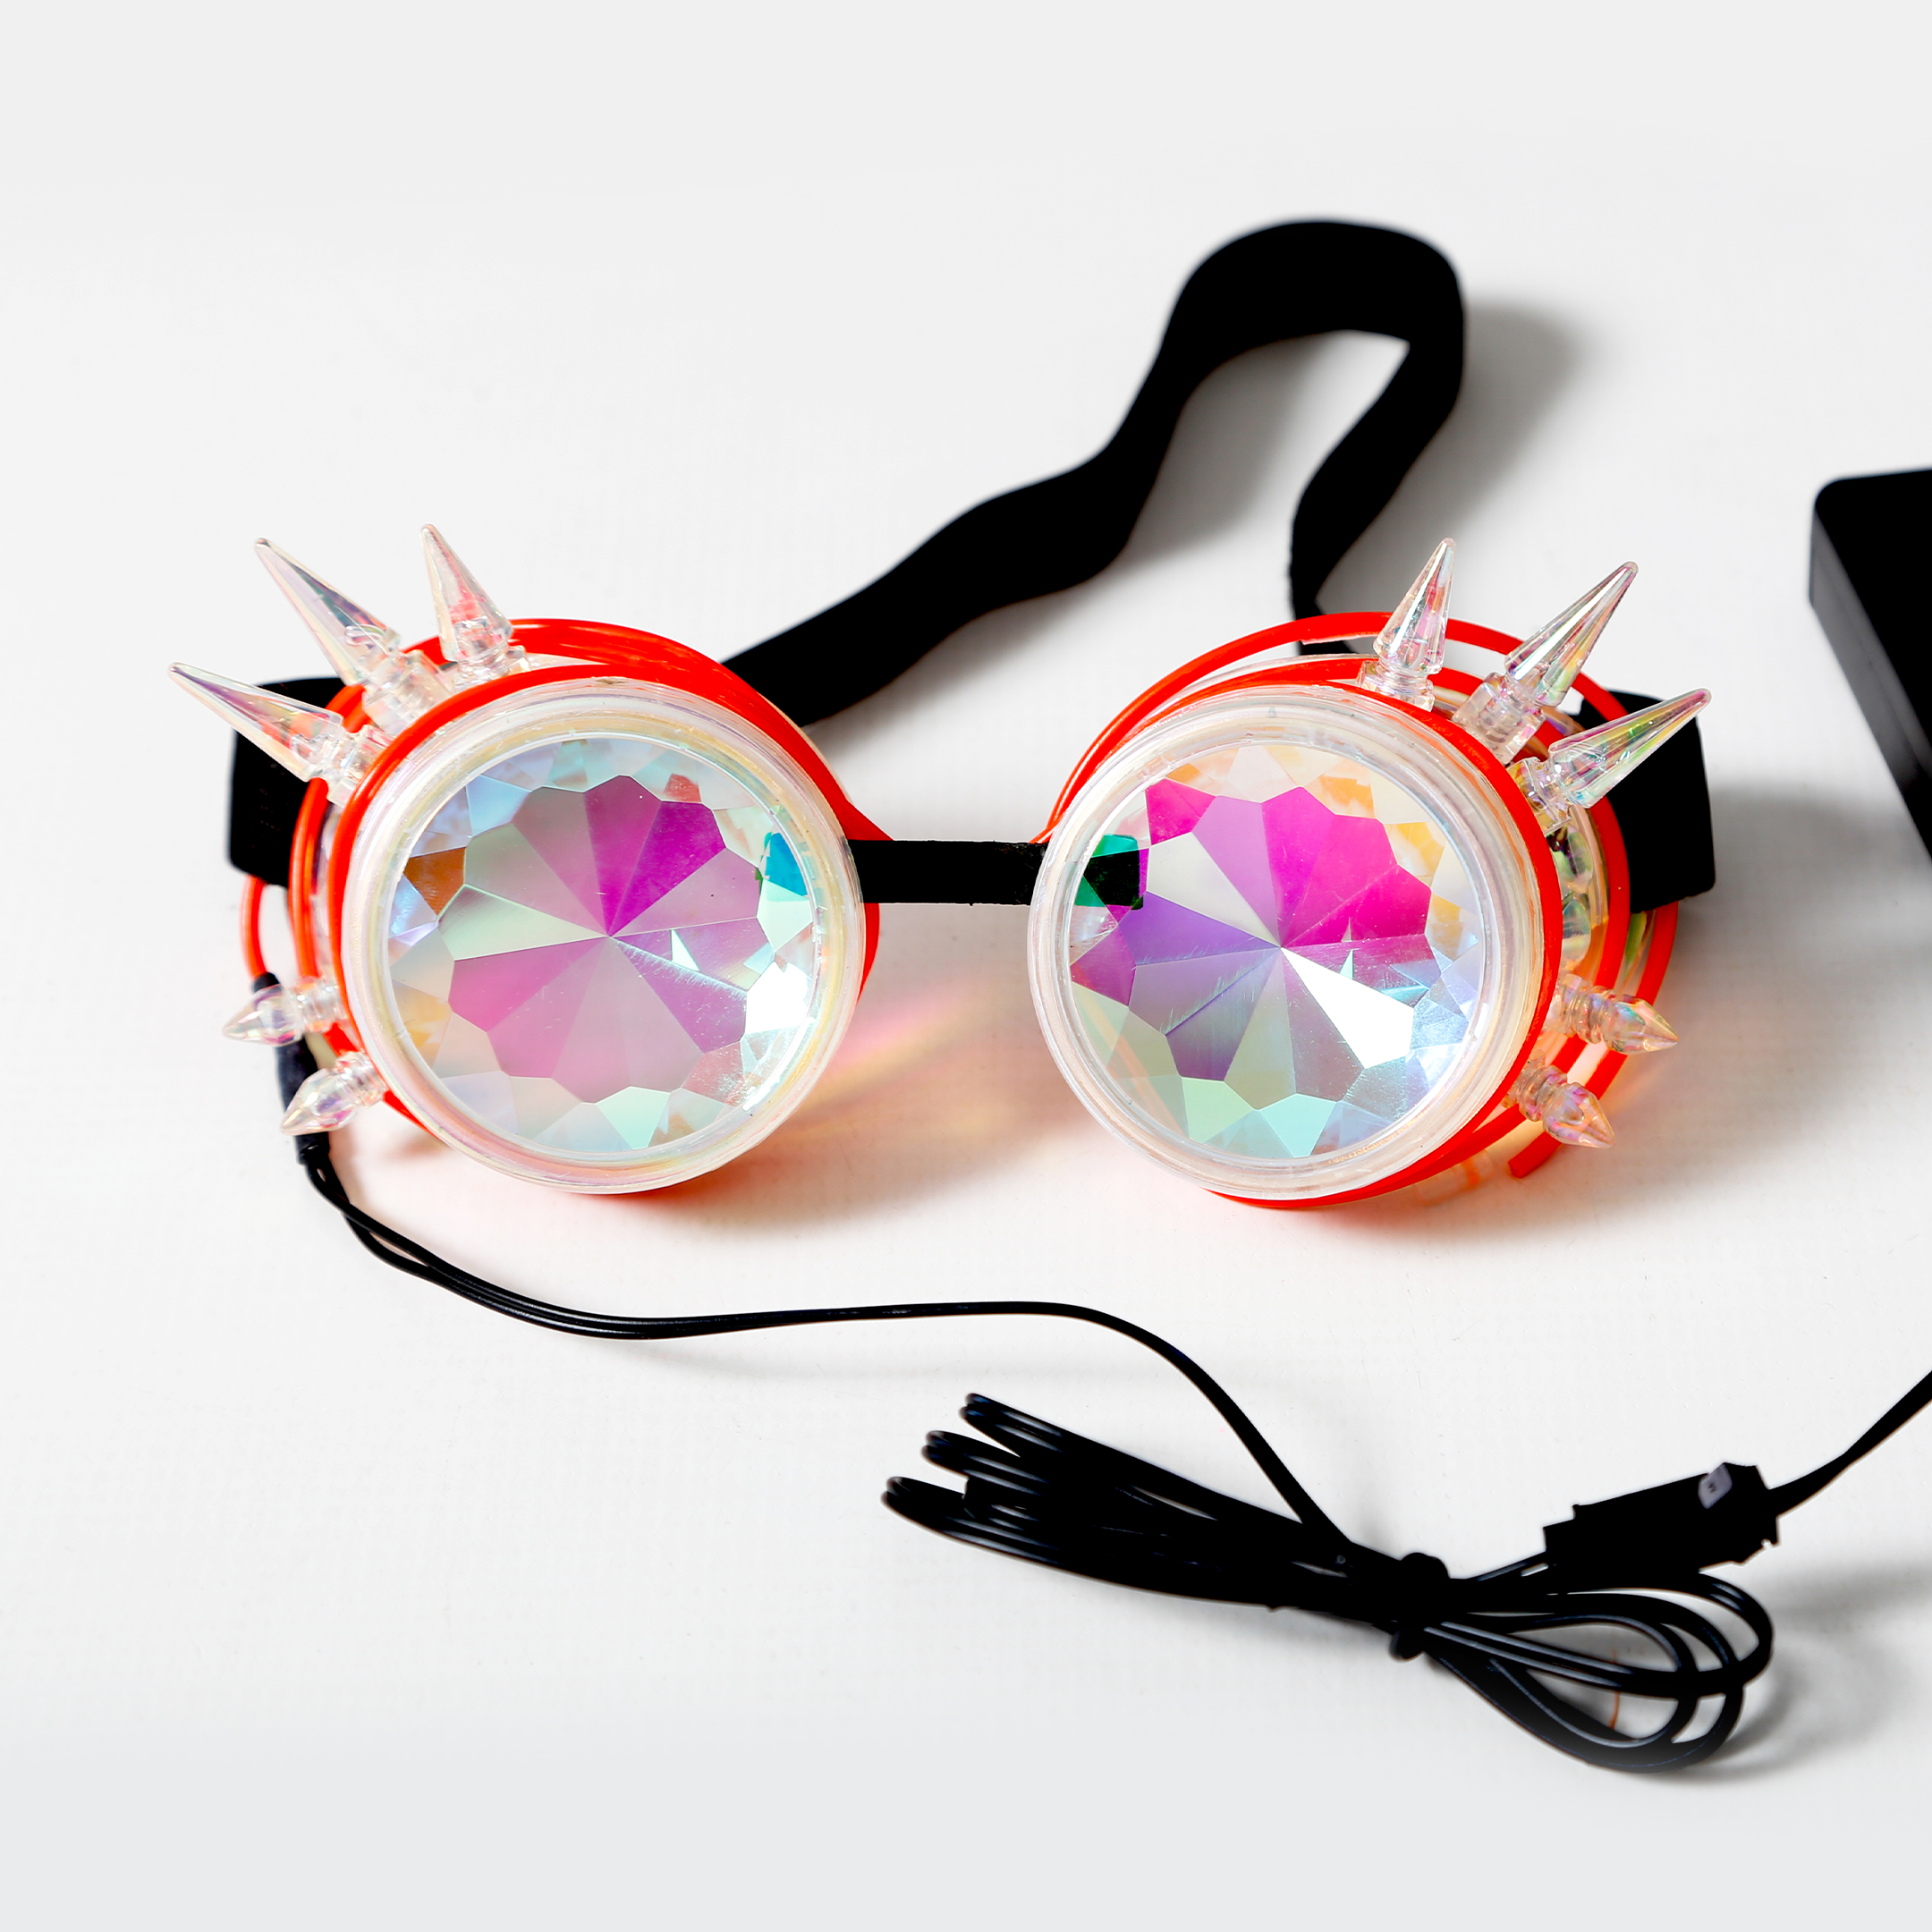 LED steampunk Kaleidoscope glasses Electro Glow | South Africa's Best LED Festival Gear & Rave Clothes - festivals outfits, clothes festival, festival clothing south africa, festival ideas outfits, festival outfits rave, festival wear, steam punk goggle, rave glasses, outfit for a rave, kaleidoscope glasses, diffraction glasses, clothes for a rave, rave sunglasses, spectral glasses, rave goggles, clothes for a rave, rave clothing south africa, festival wear south africa, accessories festival